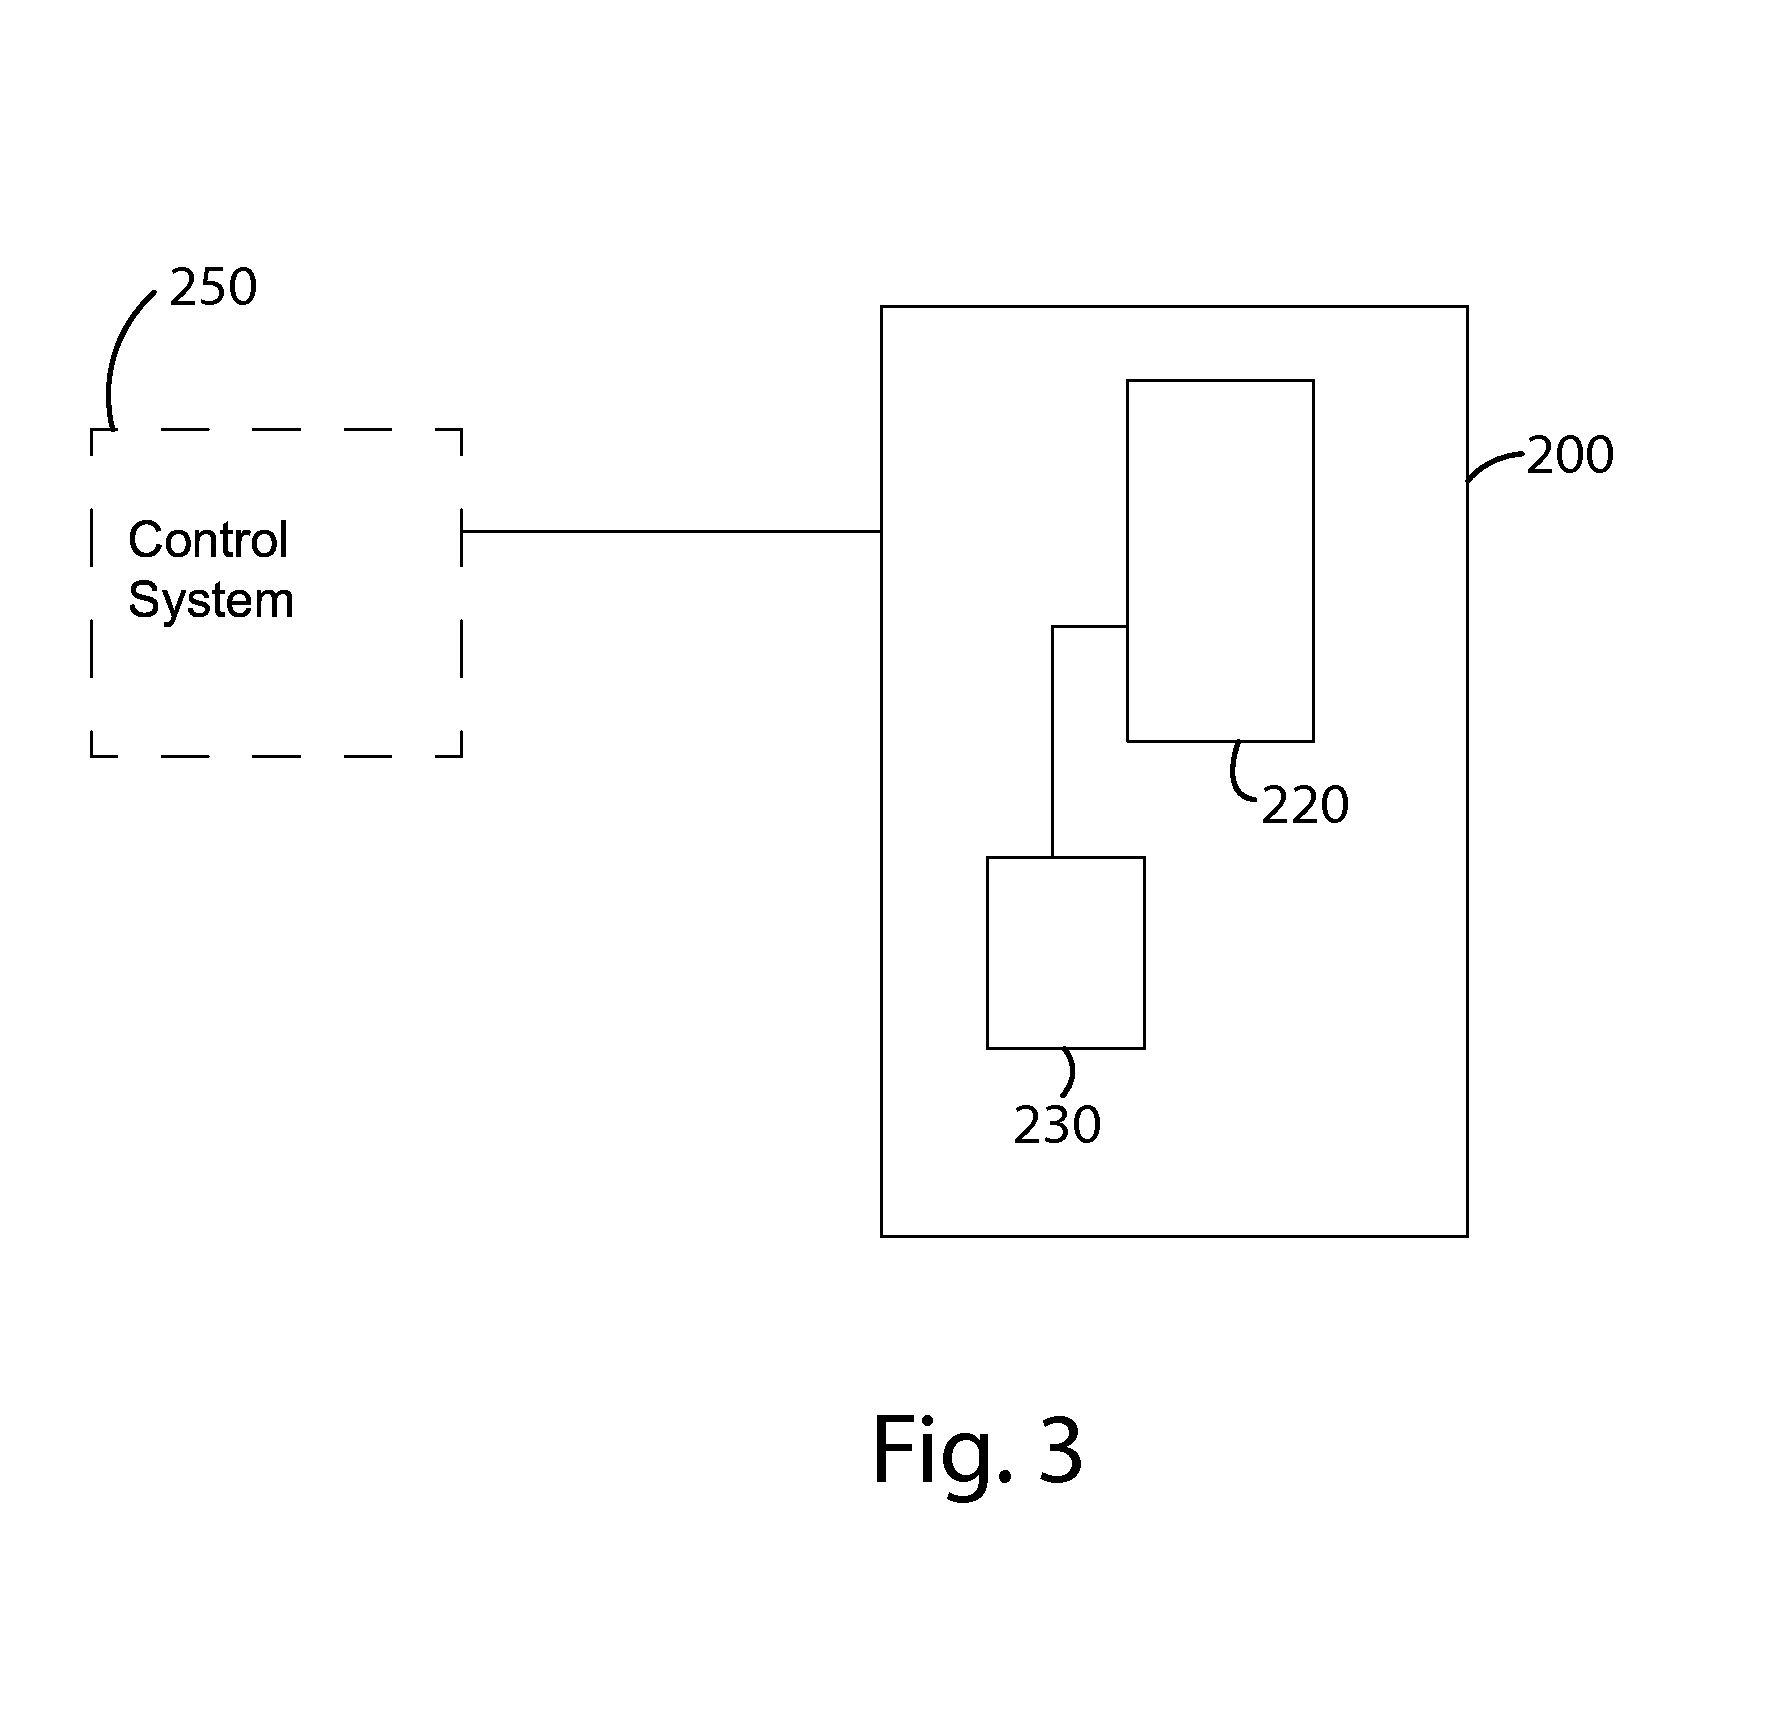 System for determining biofuel concentration